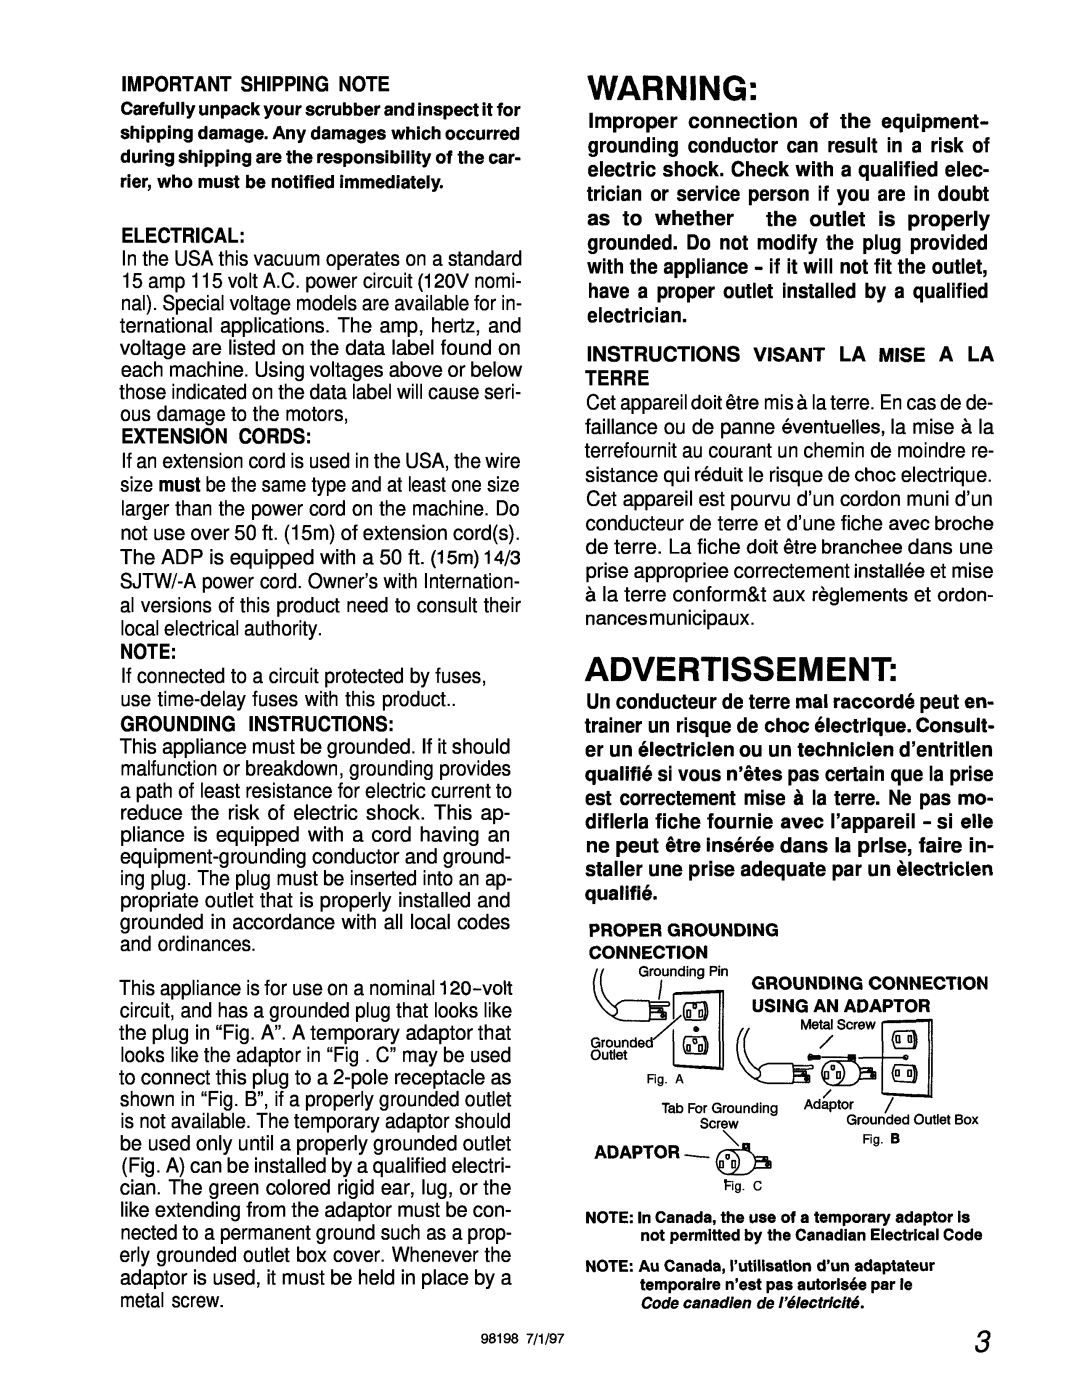 Windsor ADPJ manual Advertissement, Important Shipping Note, Electrical, Extension Cords, Grounding Instructions 